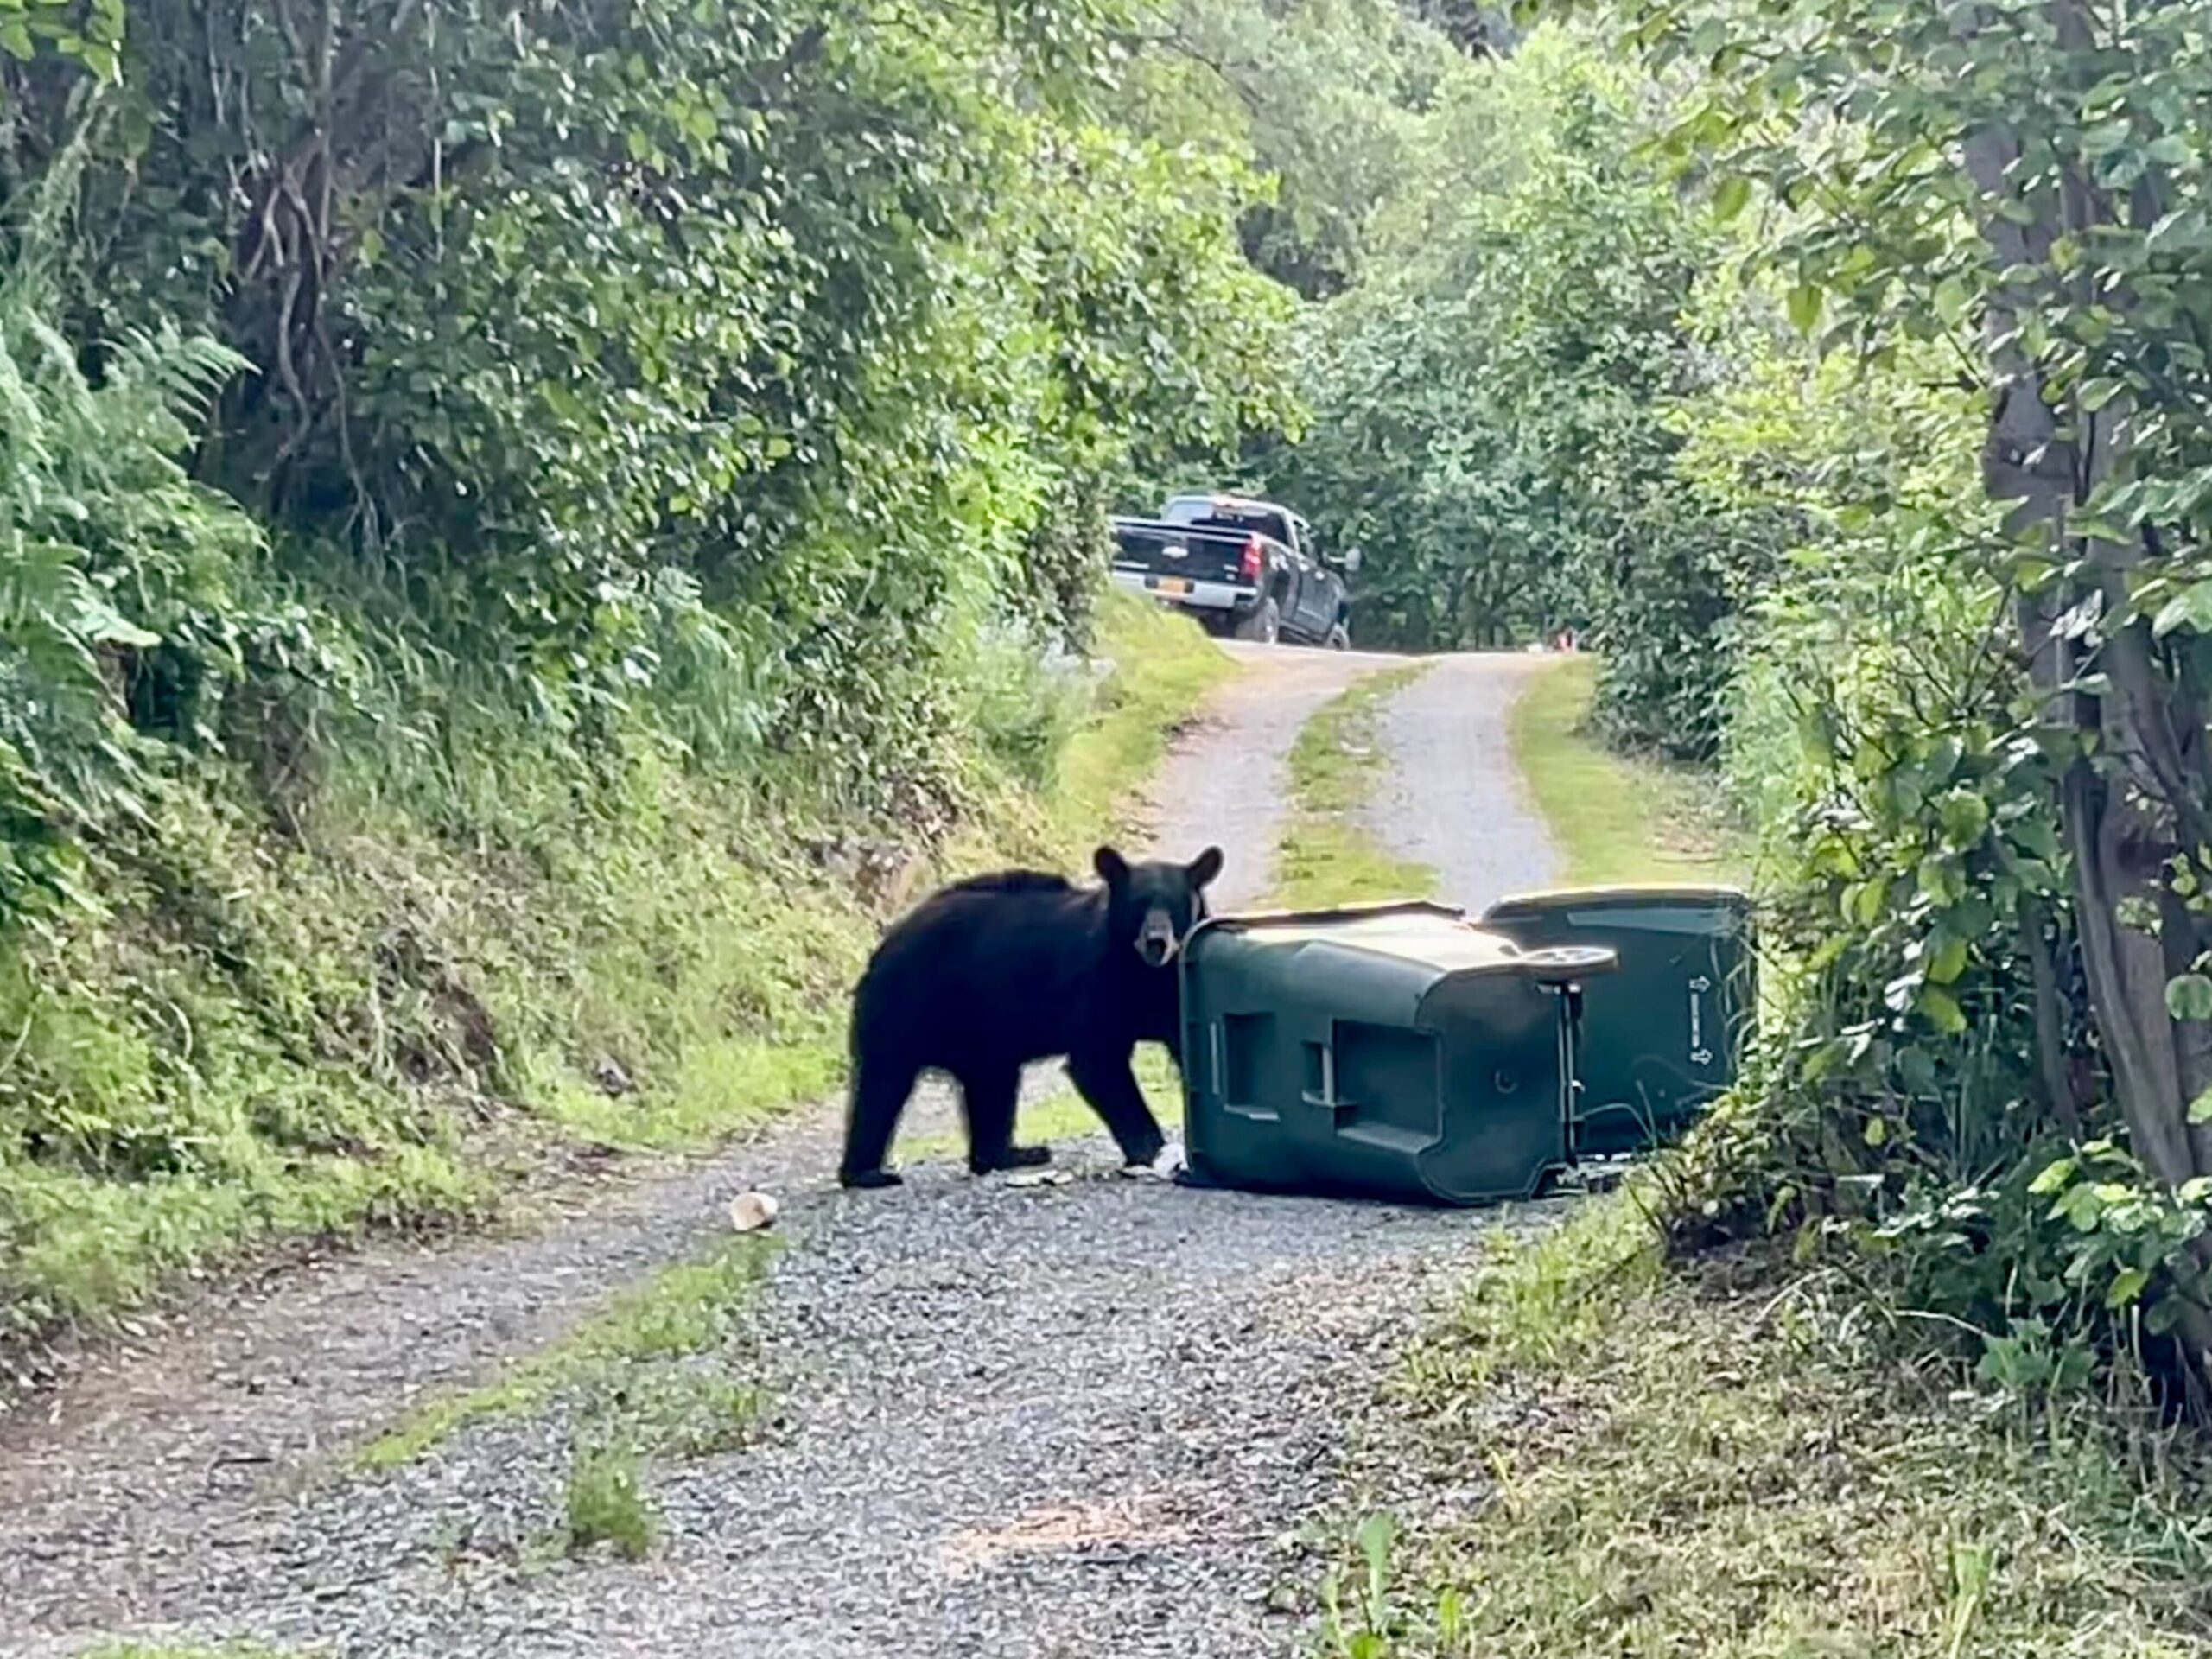 a black bear rummages in garbage cans, in a person's long gravel driveway